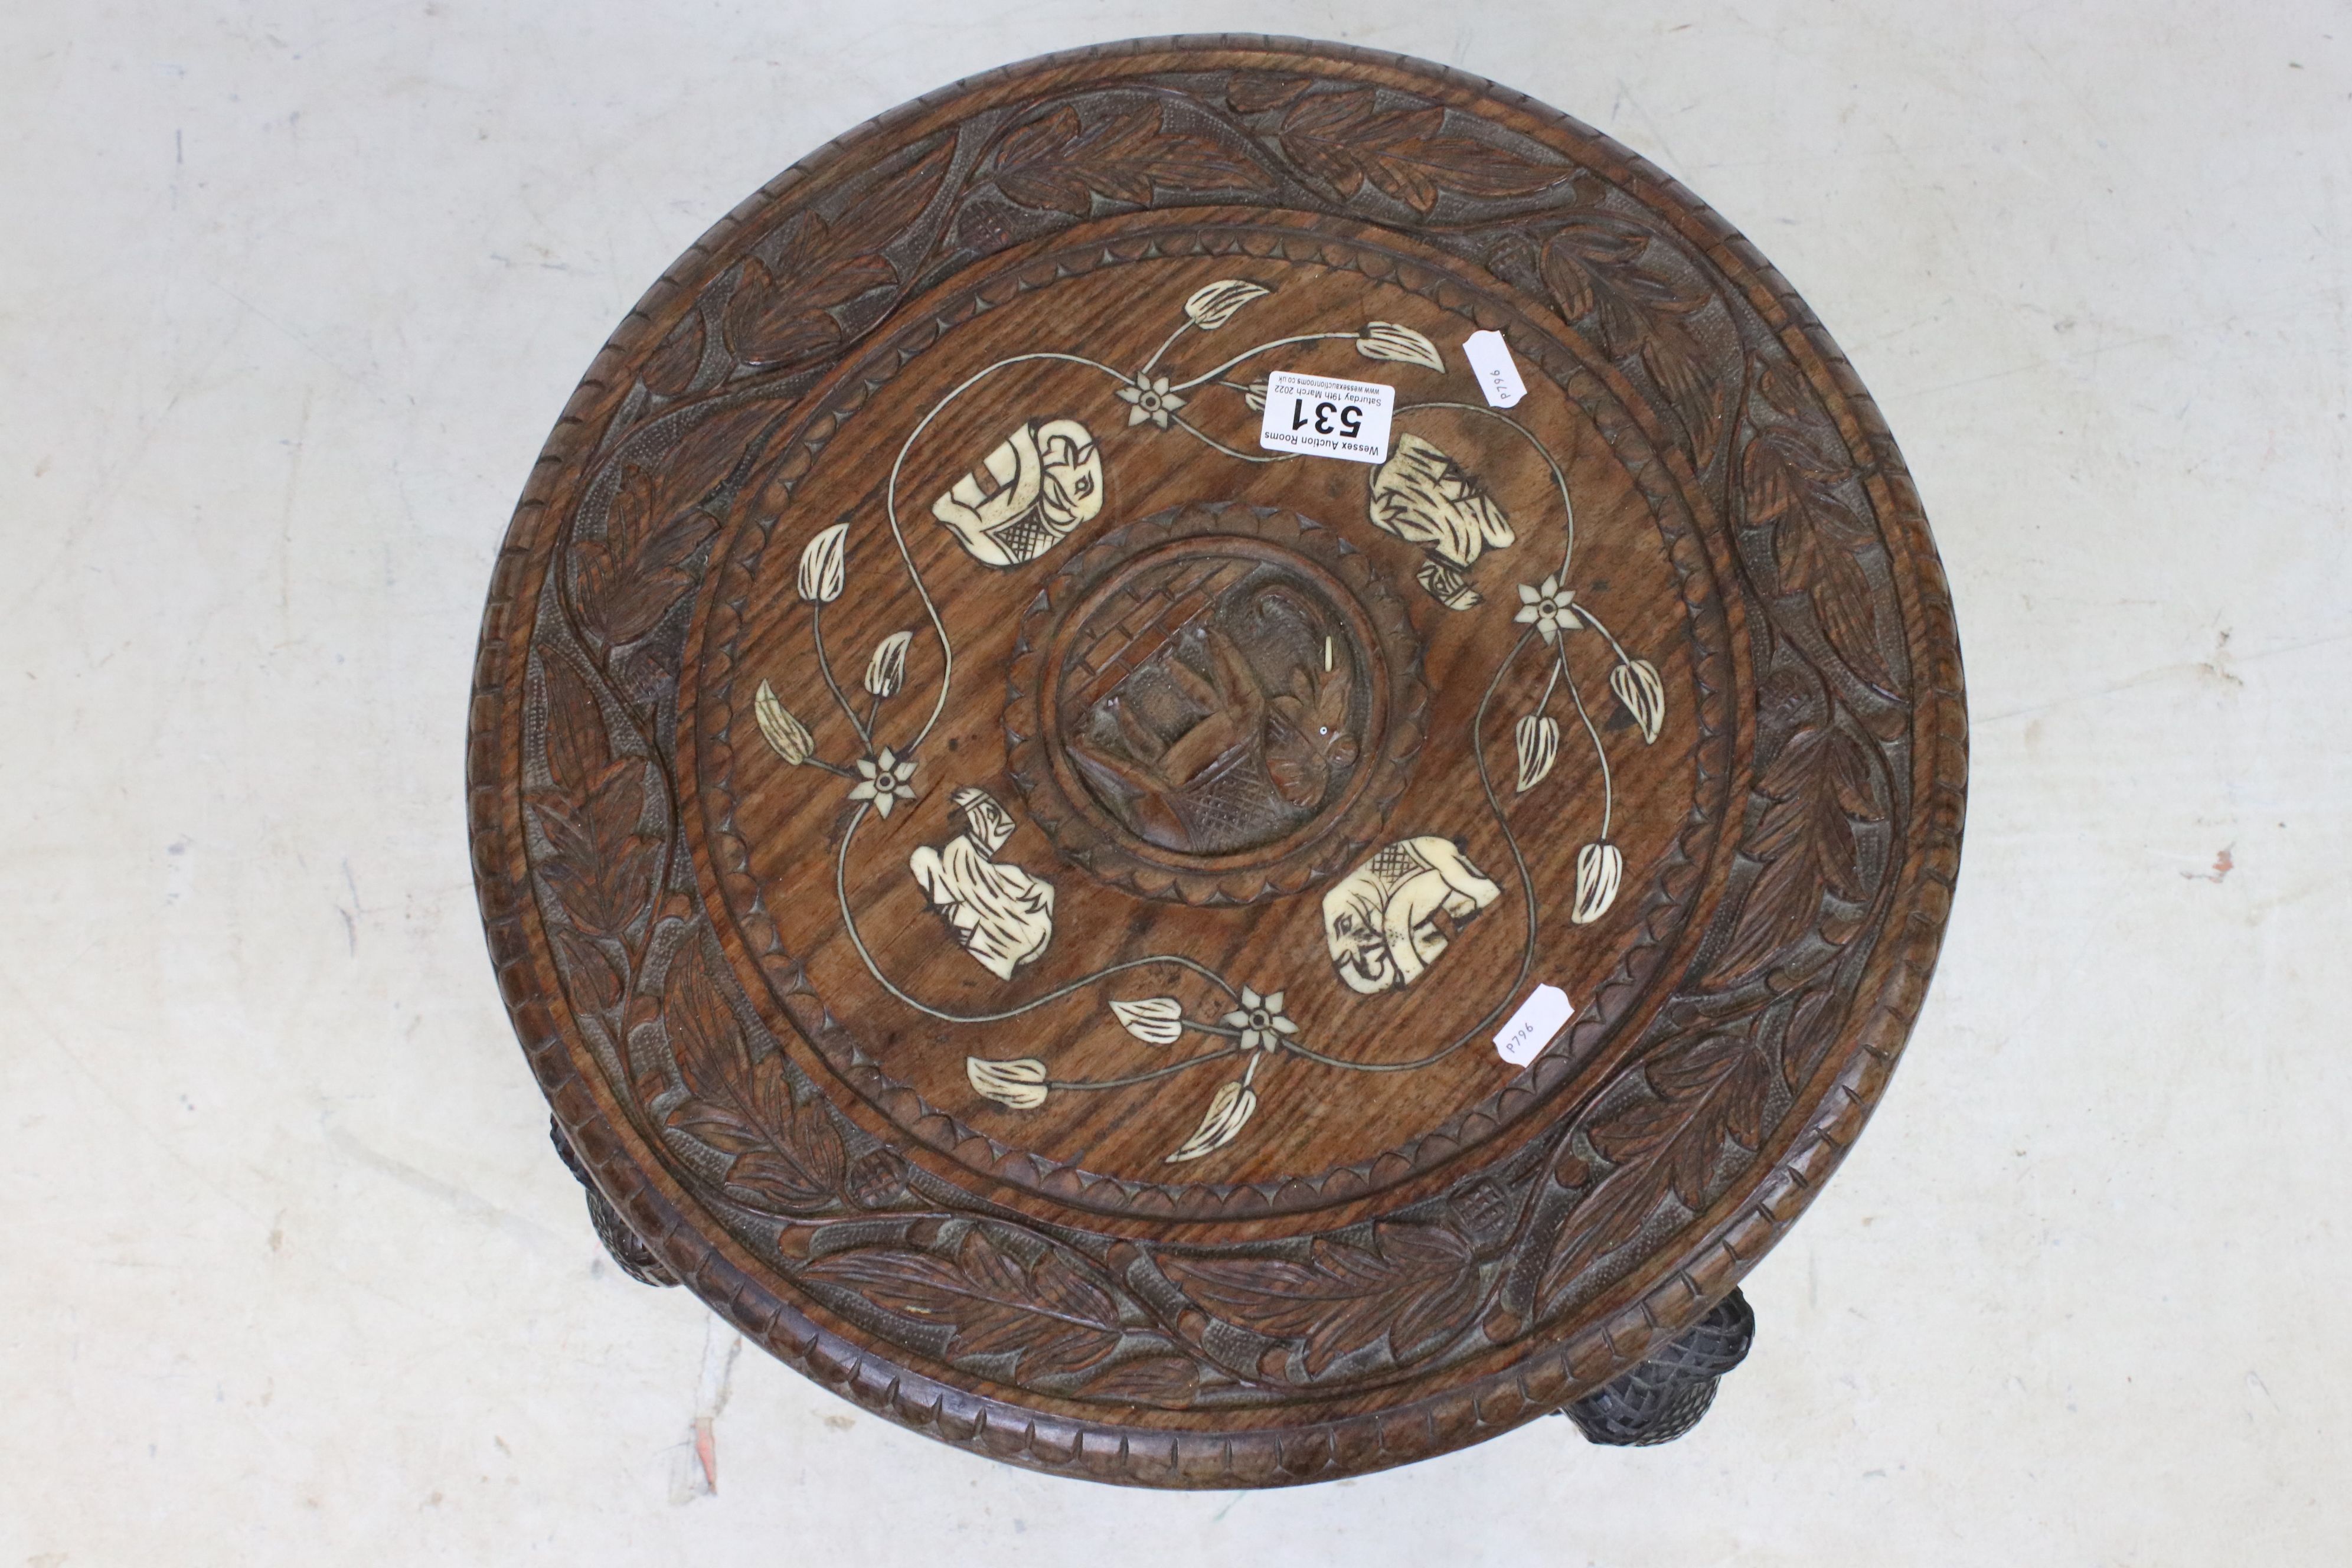 Indian Hardwood Circular Table with bone inlay, the four legs carved in the form of Elephant Heads - Image 5 of 5